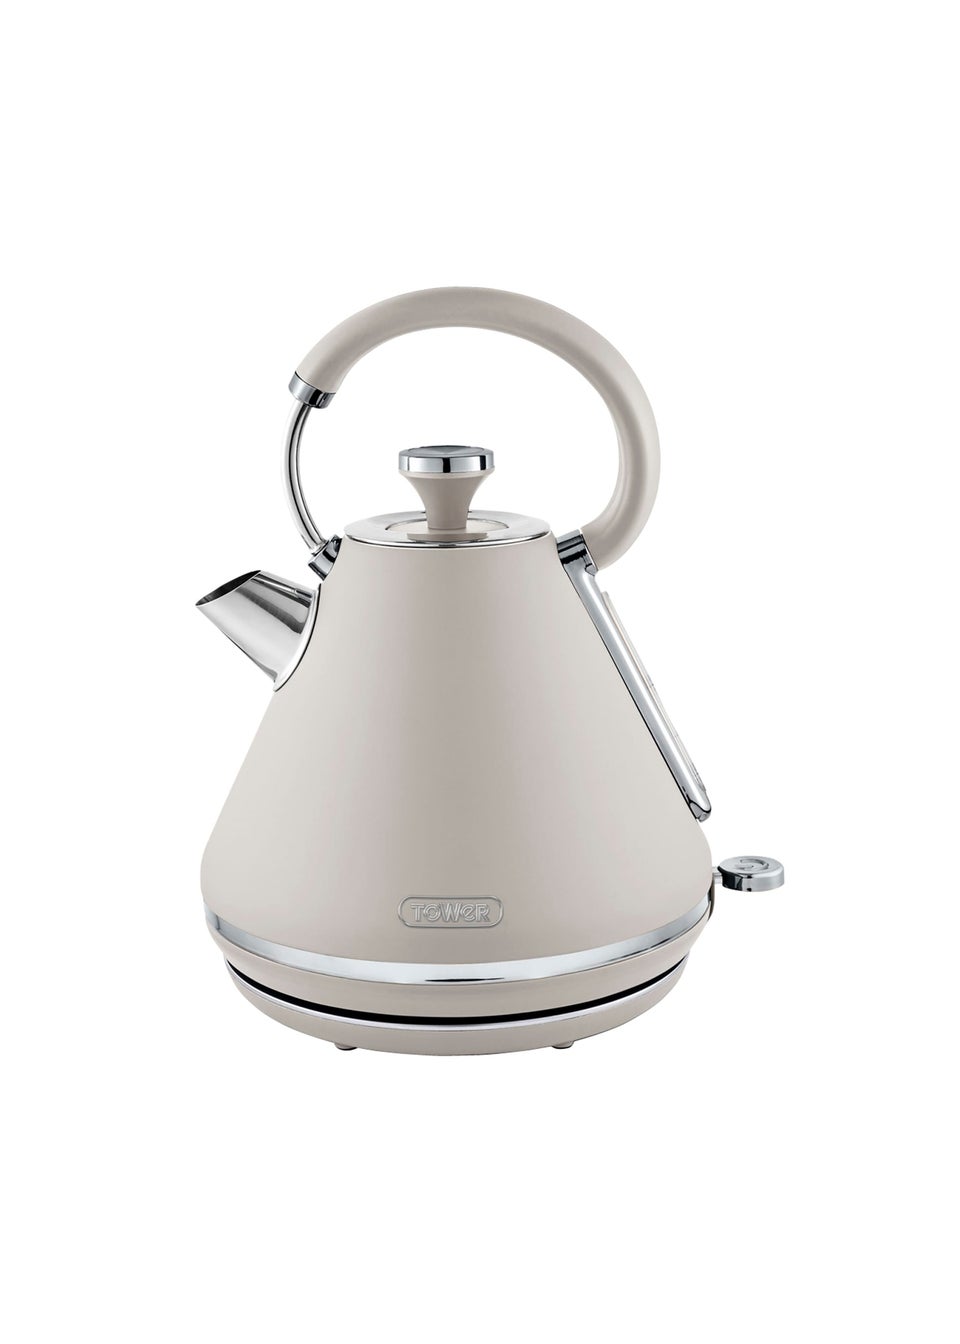 Tower Cavaletto Pyramid Kettle (1.7L)